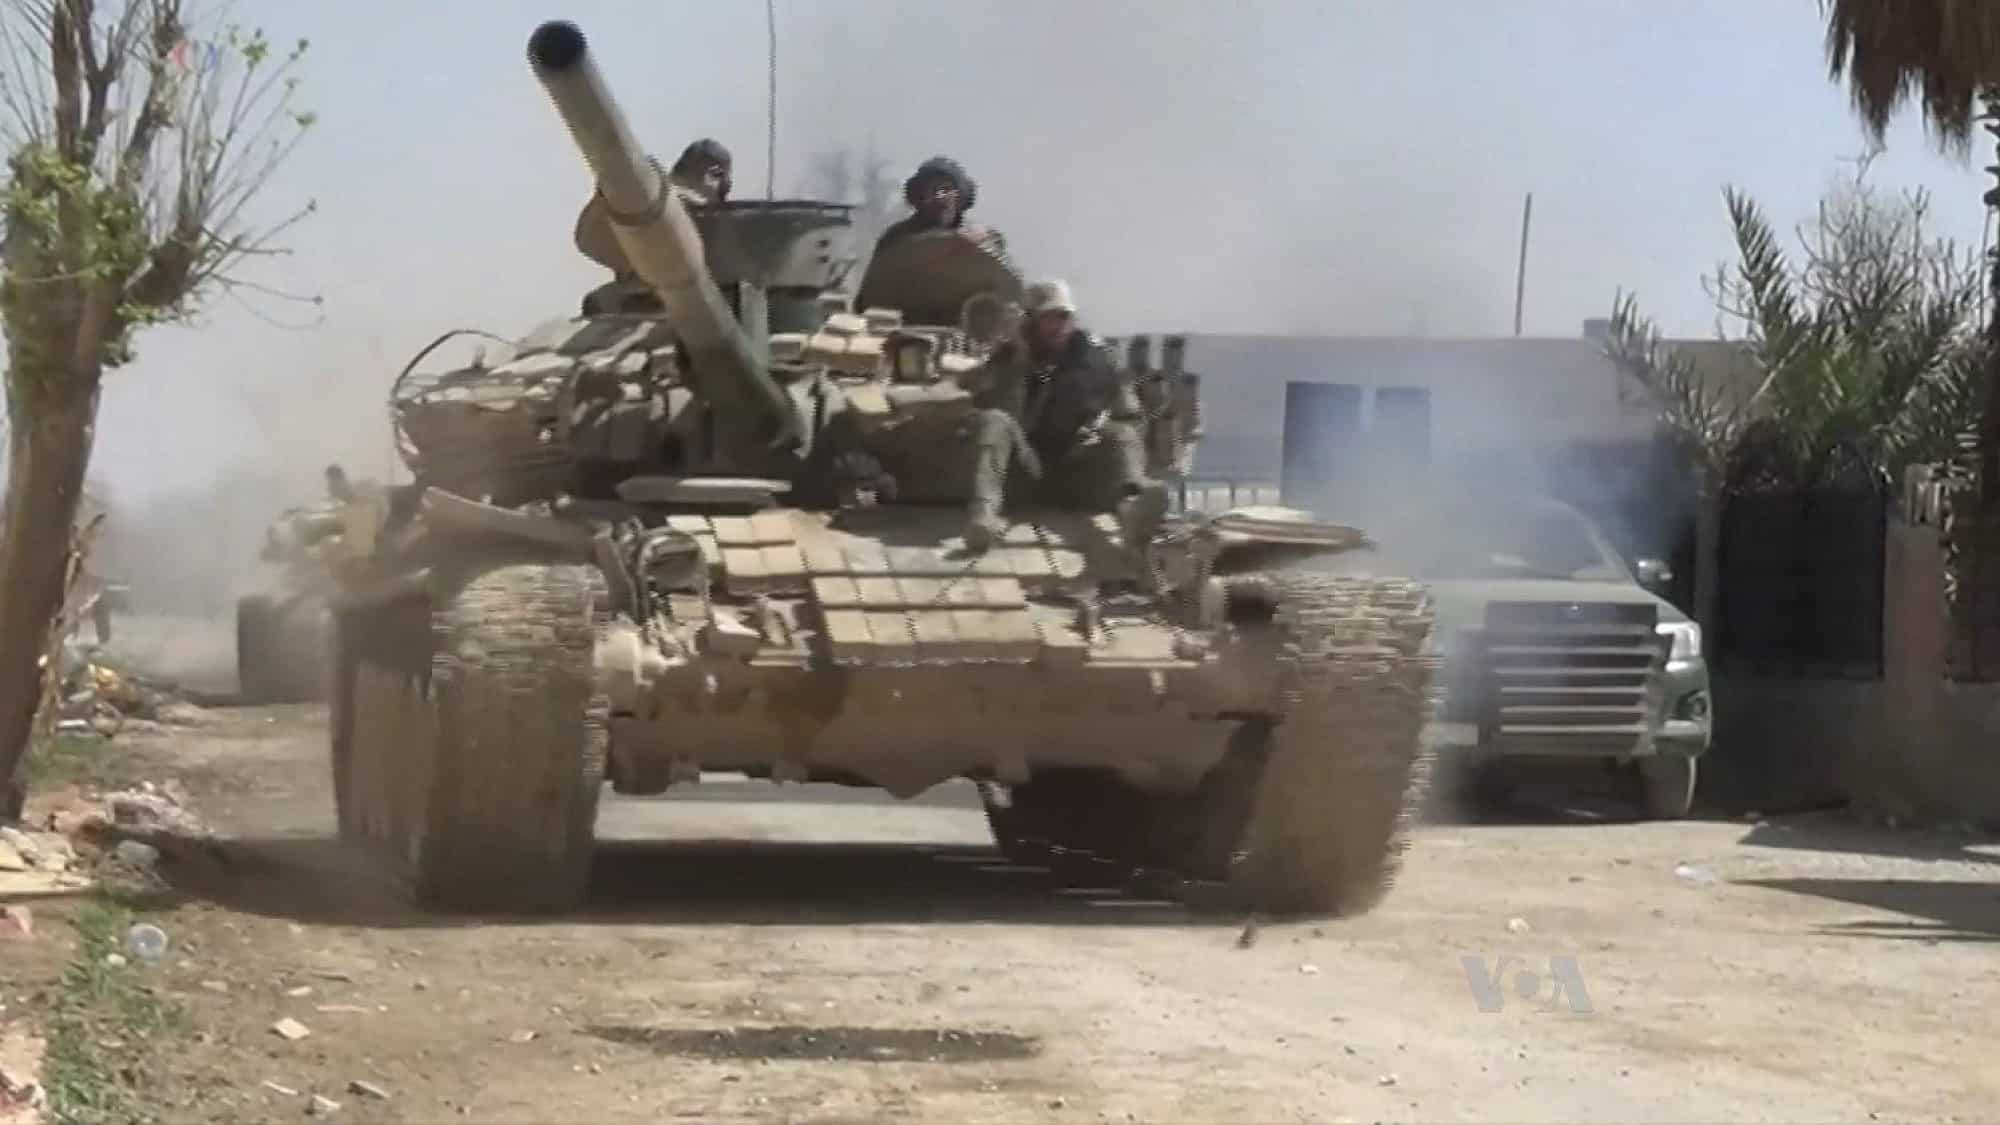 A Syrian Army T-72 tank during the 2018 Rif Dimashq offensive. Source: Wikimedia Commons.